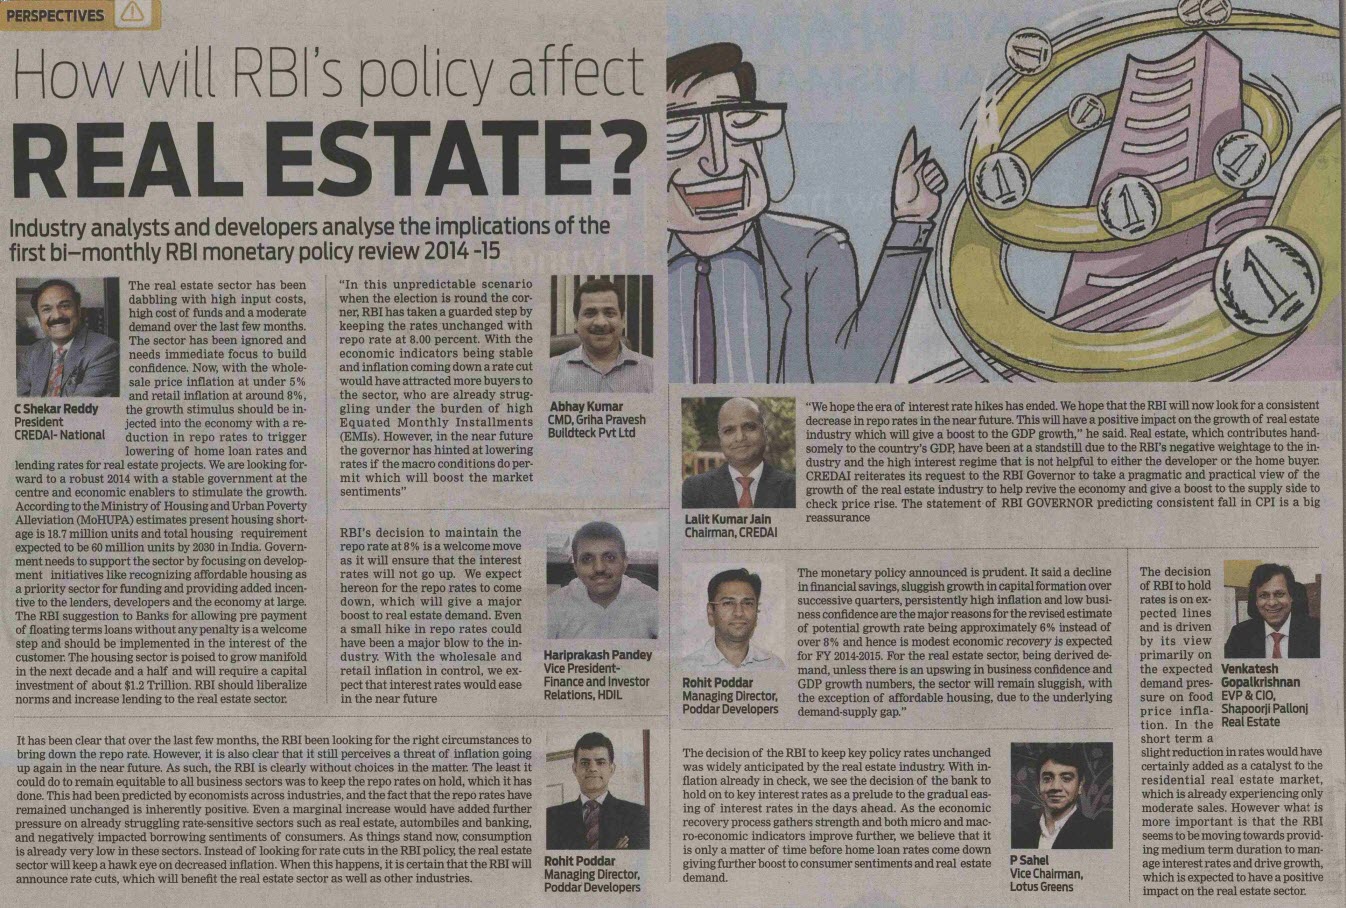 How will RBI's policy affect real estate?